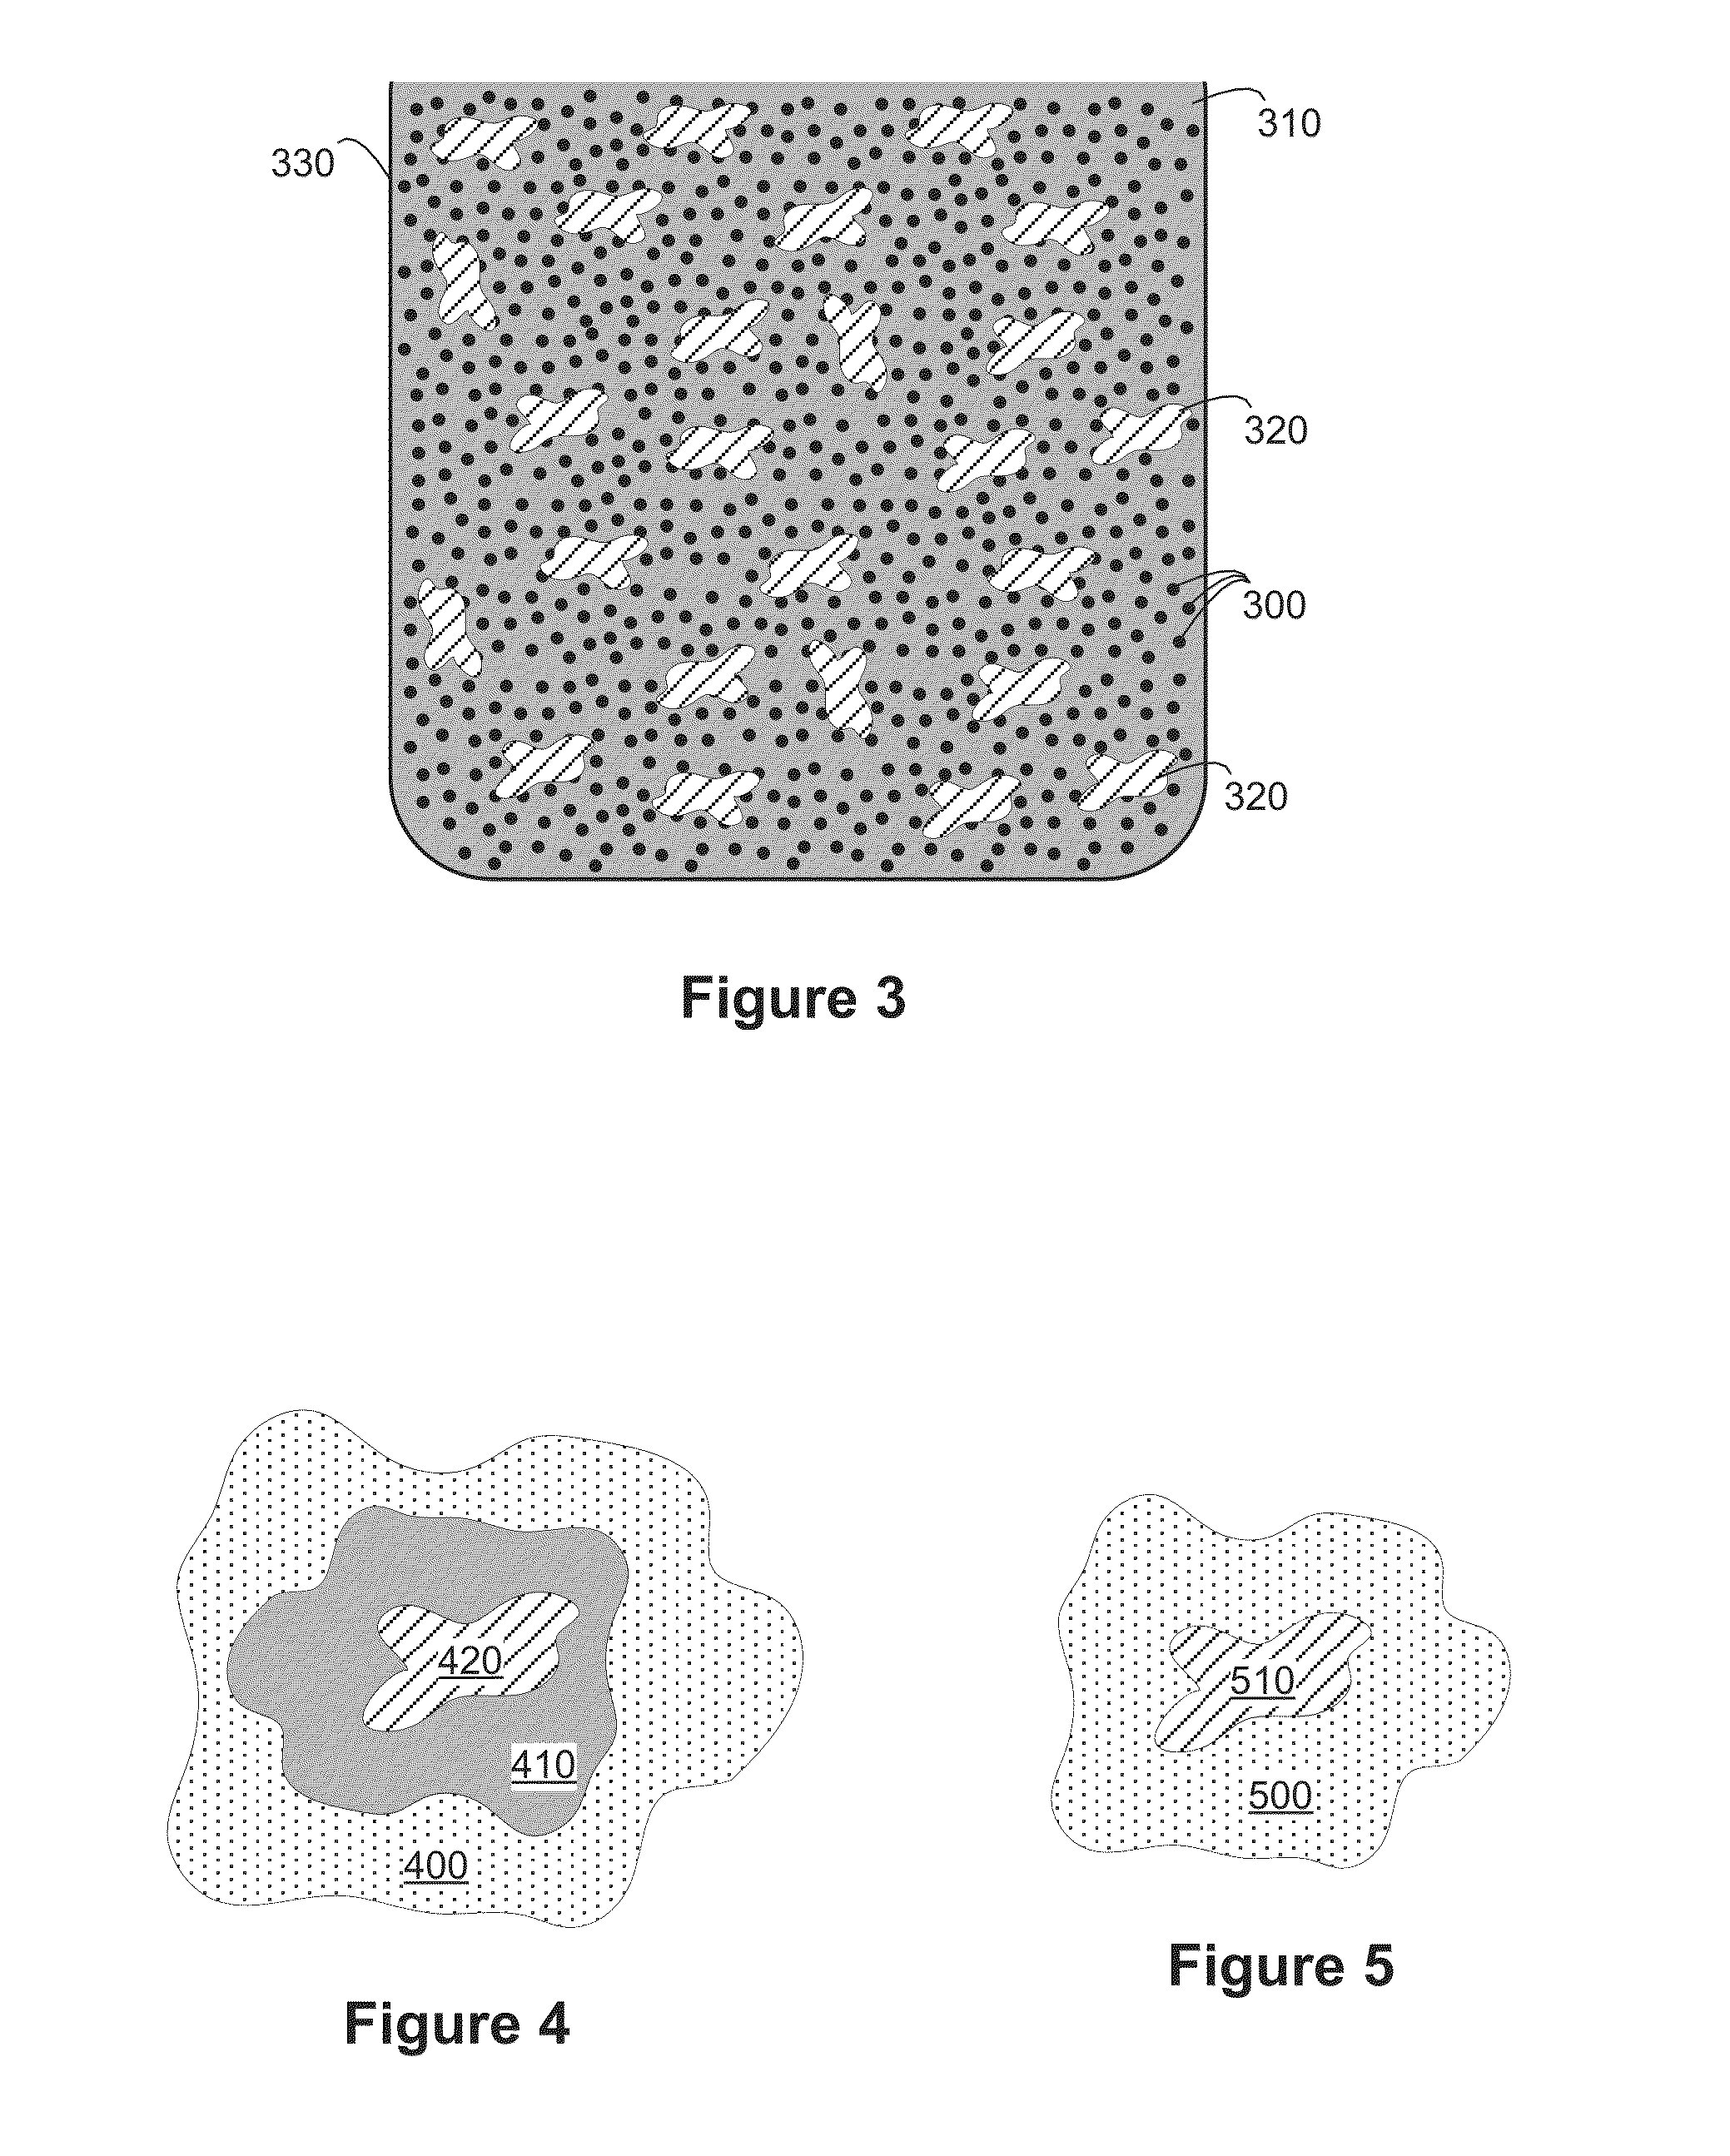 Method of enhancing palatability of a dietary supplement to animal food